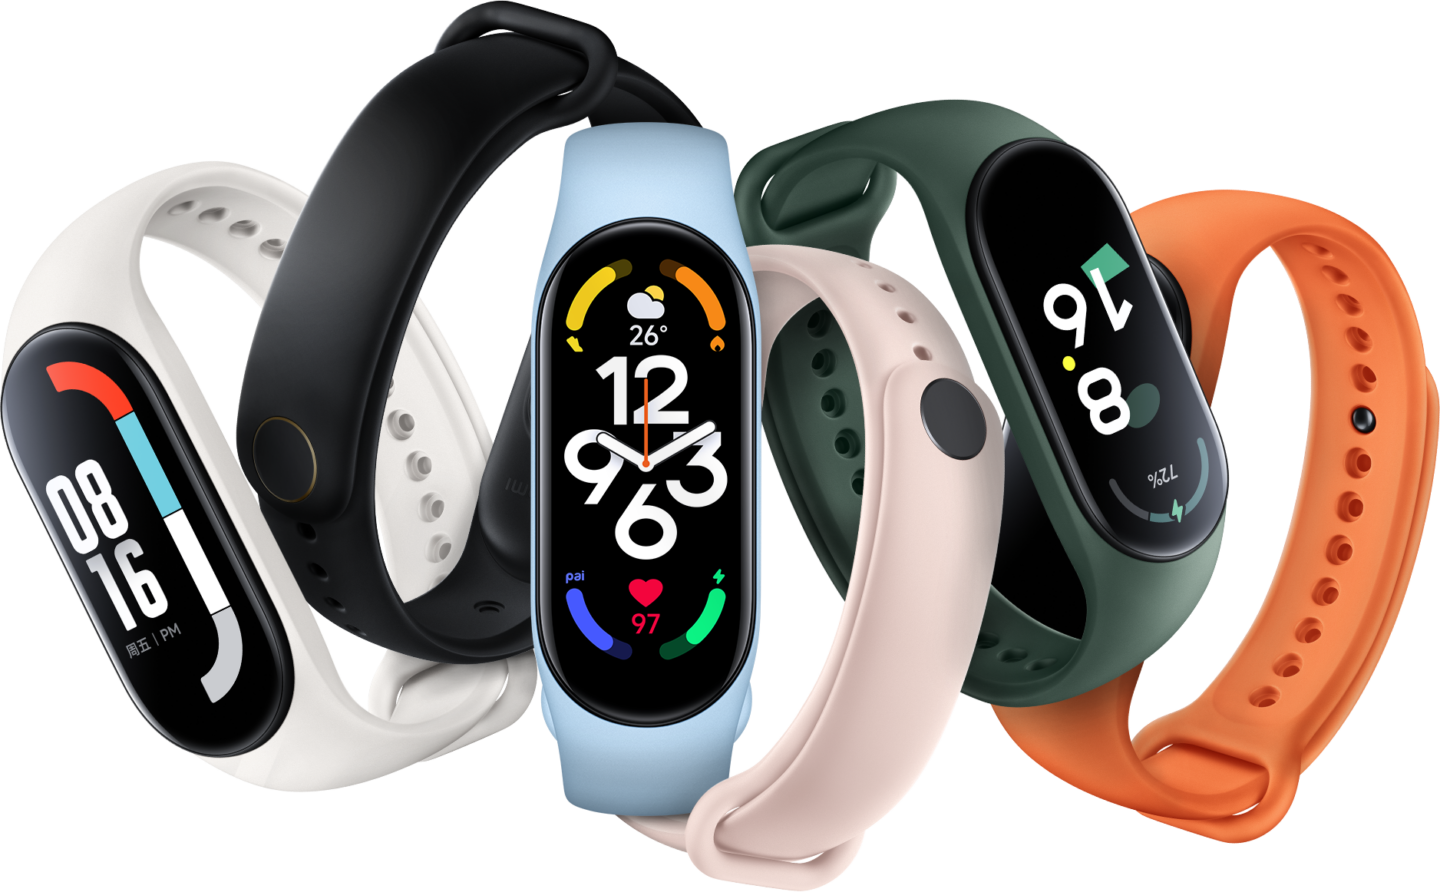 Xiaomi has officially presented the Mi Band 7 fitness bracelet